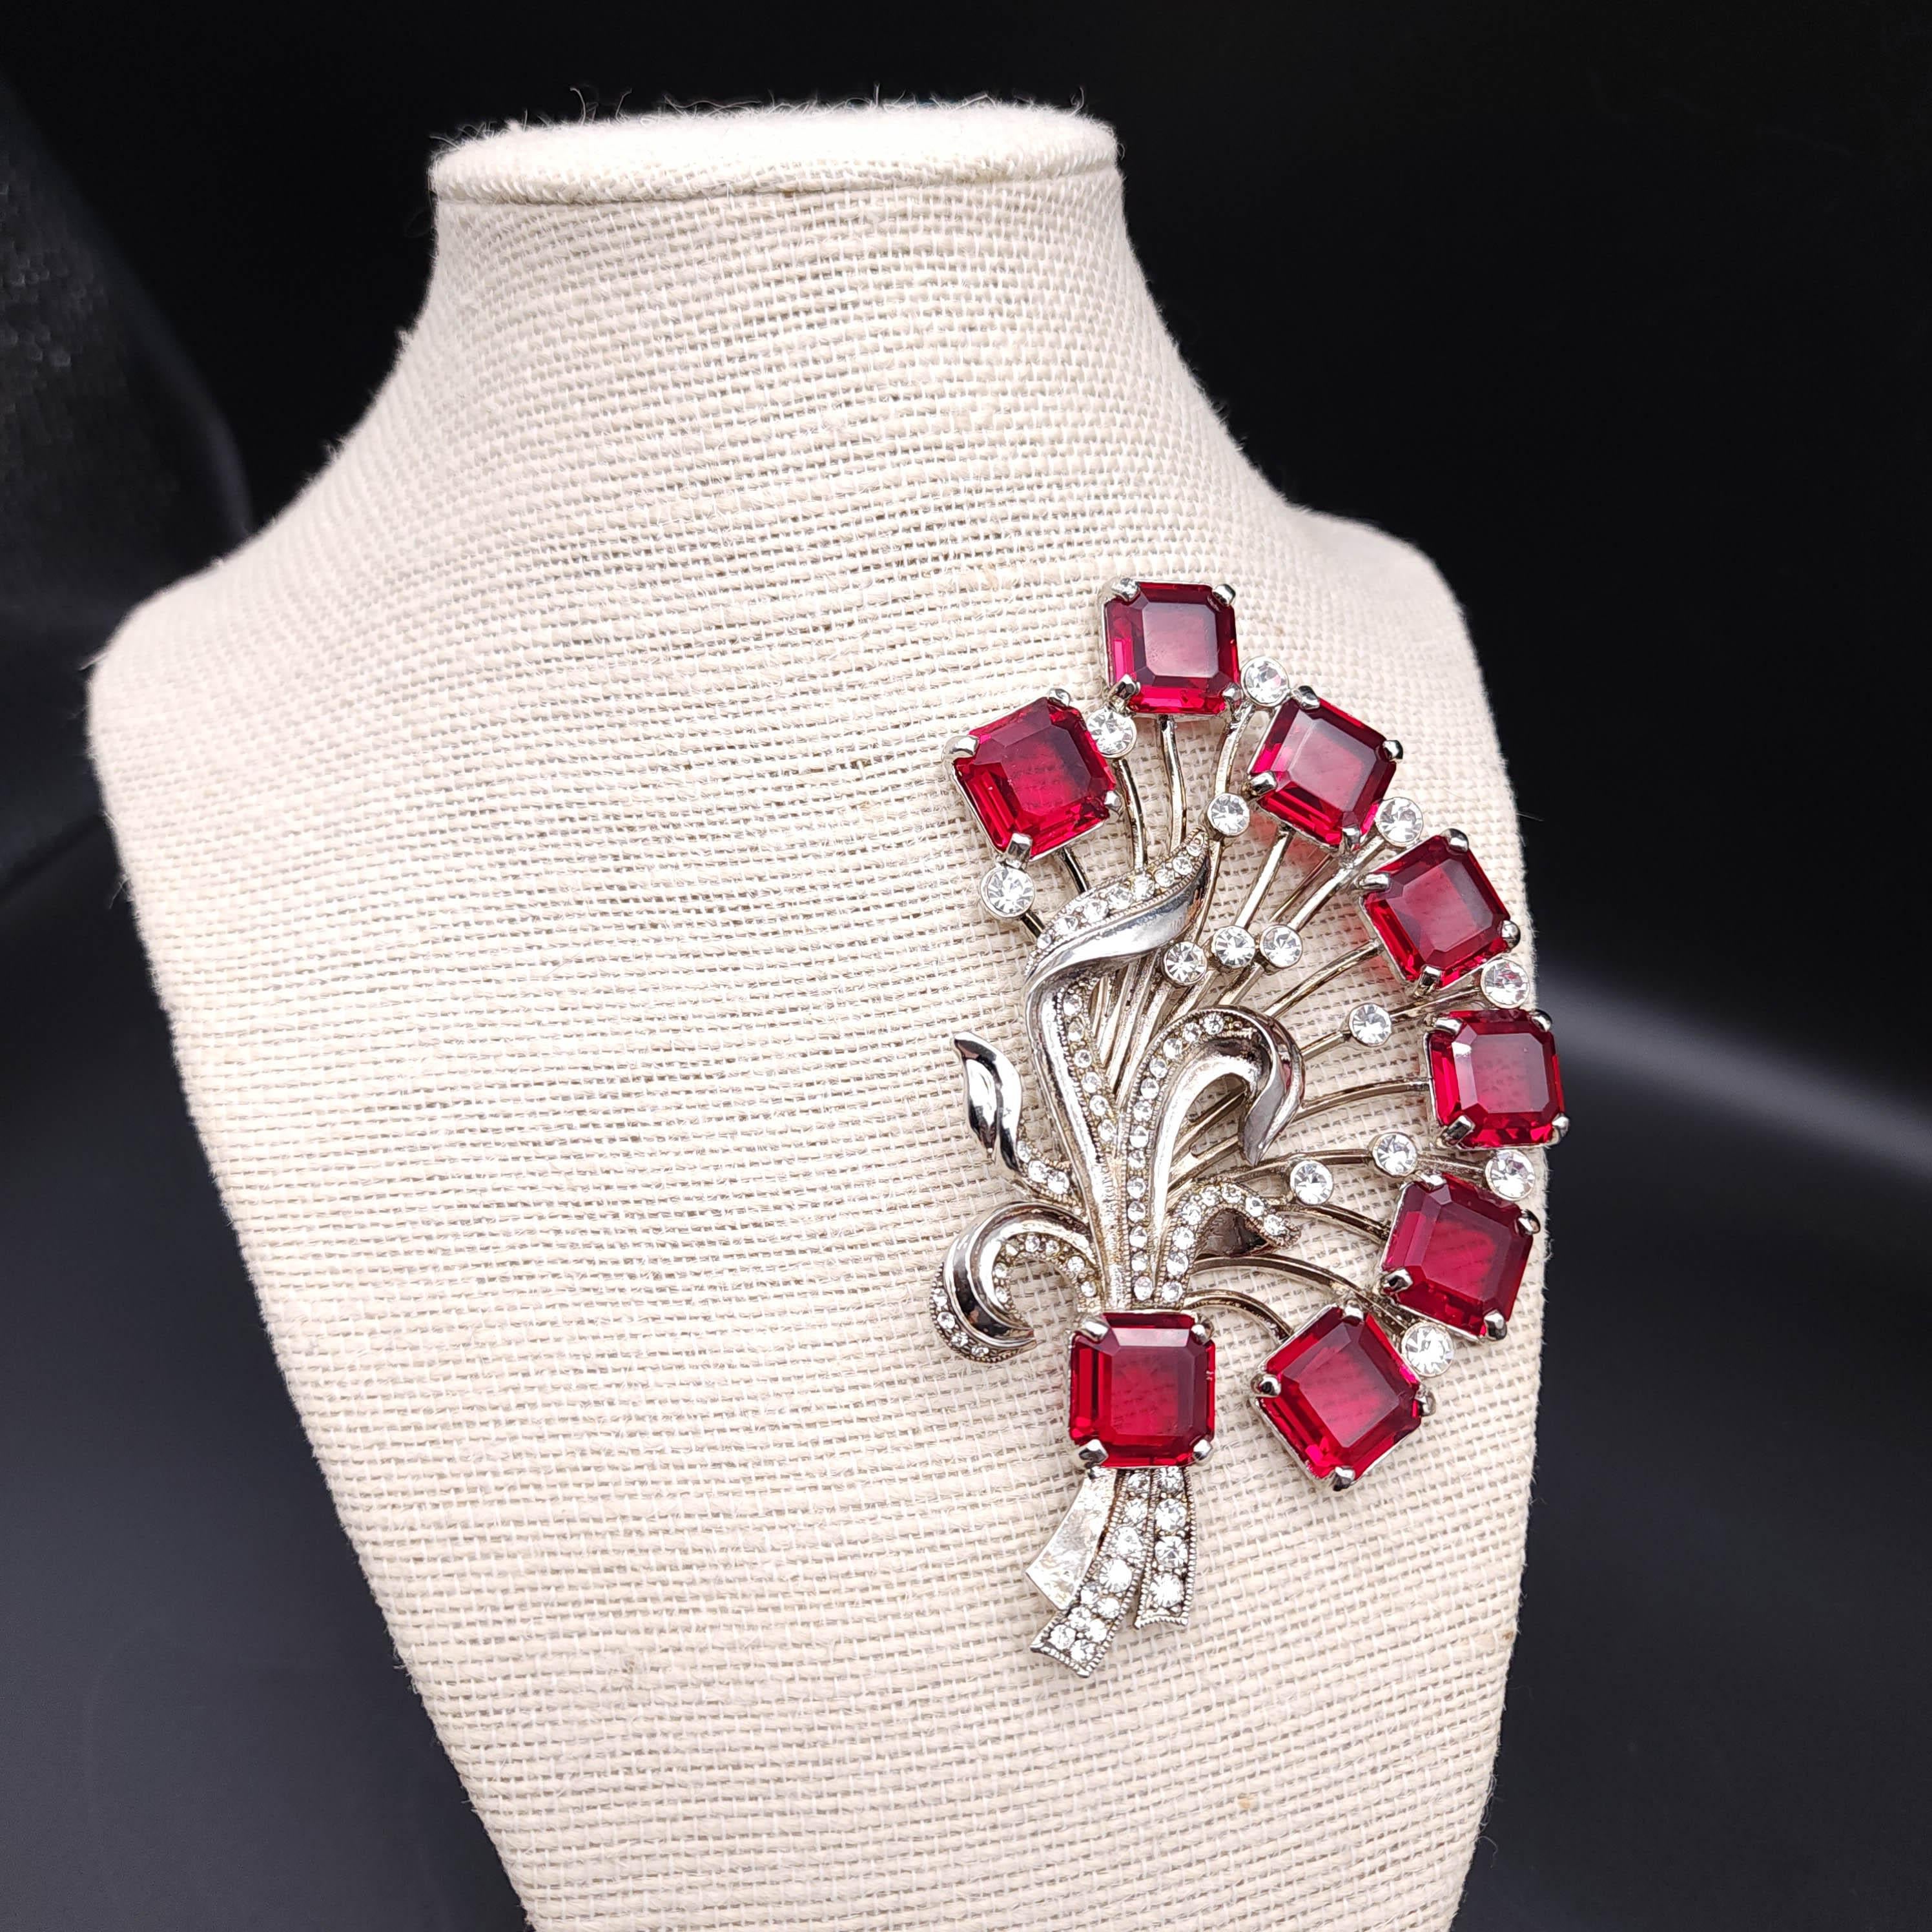 Discover the charm of yesteryear with this Vintage Eisenberg Ice flower bouquet pin brooch. This exquisite piece features a timeless silver design, with each flower meticulously adorned with prong-set ruby crystals that exude a rich, vibrant hue.